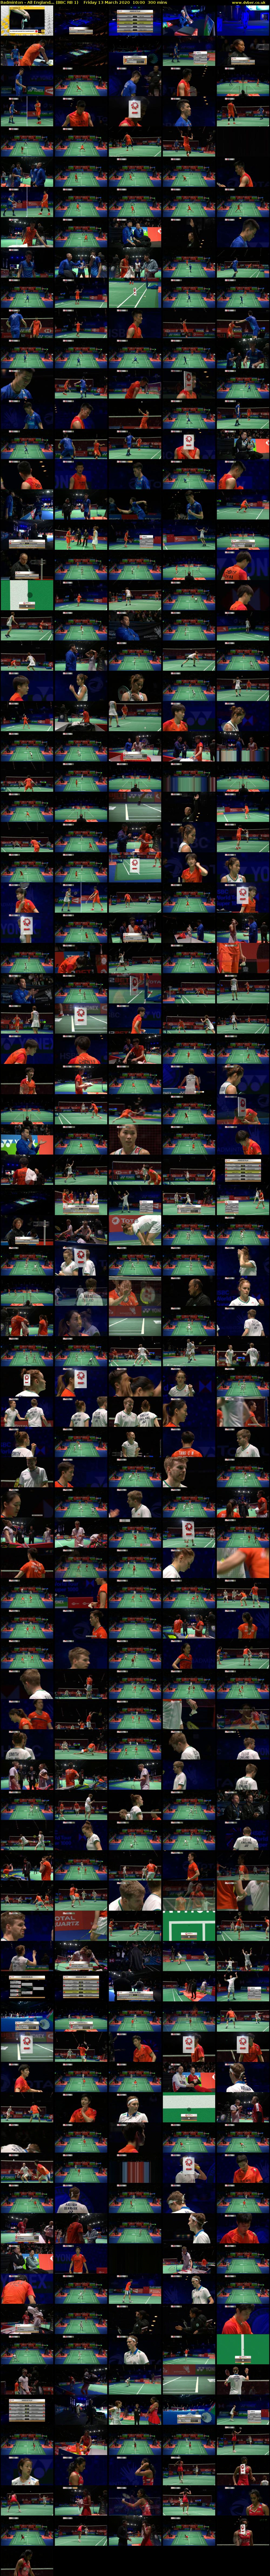 Badminton - All England... (BBC RB 1) Friday 13 March 2020 10:00 - 15:00